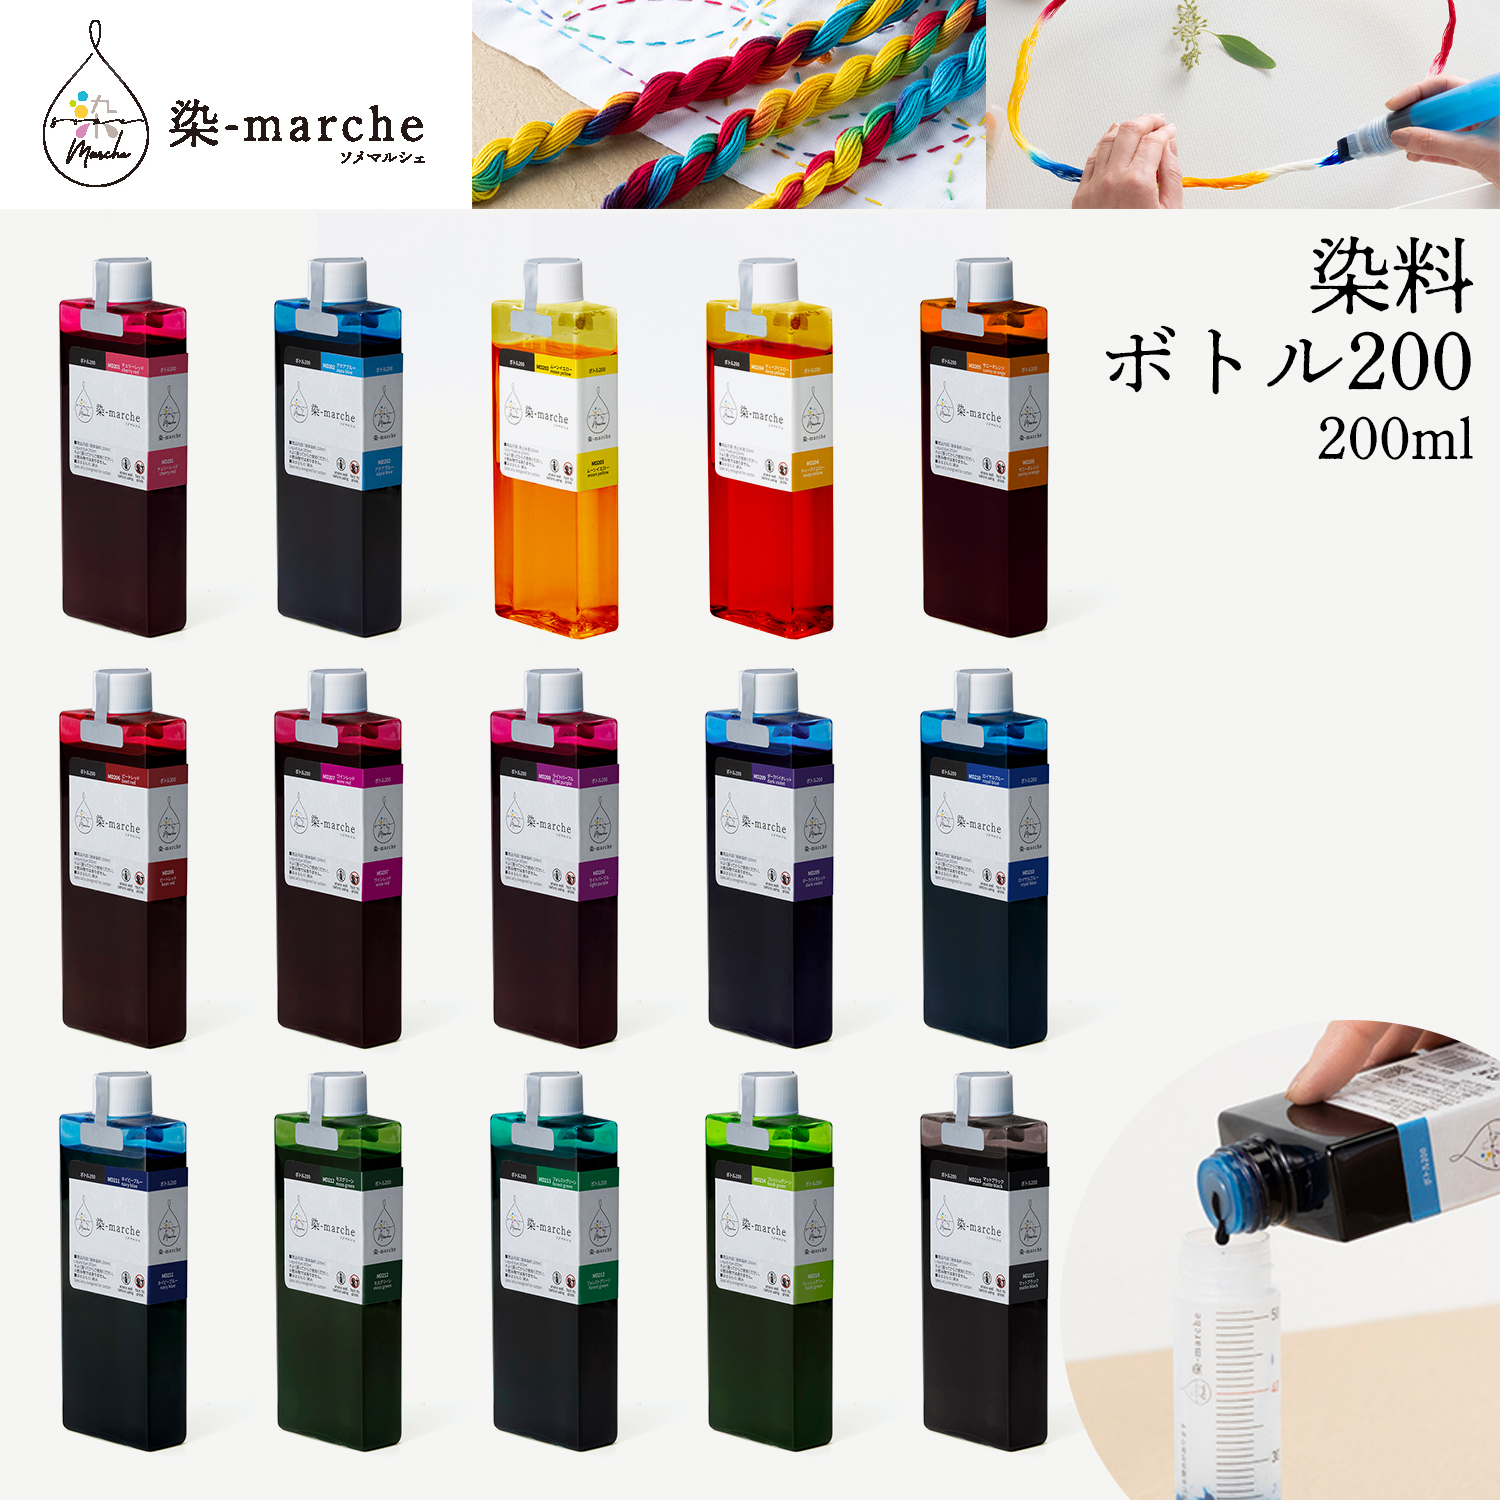 [Order upon demand"", not returnable]OLY-MD201 "Some-marche" Bottle 200 200ml 3 piece unit (pcs)